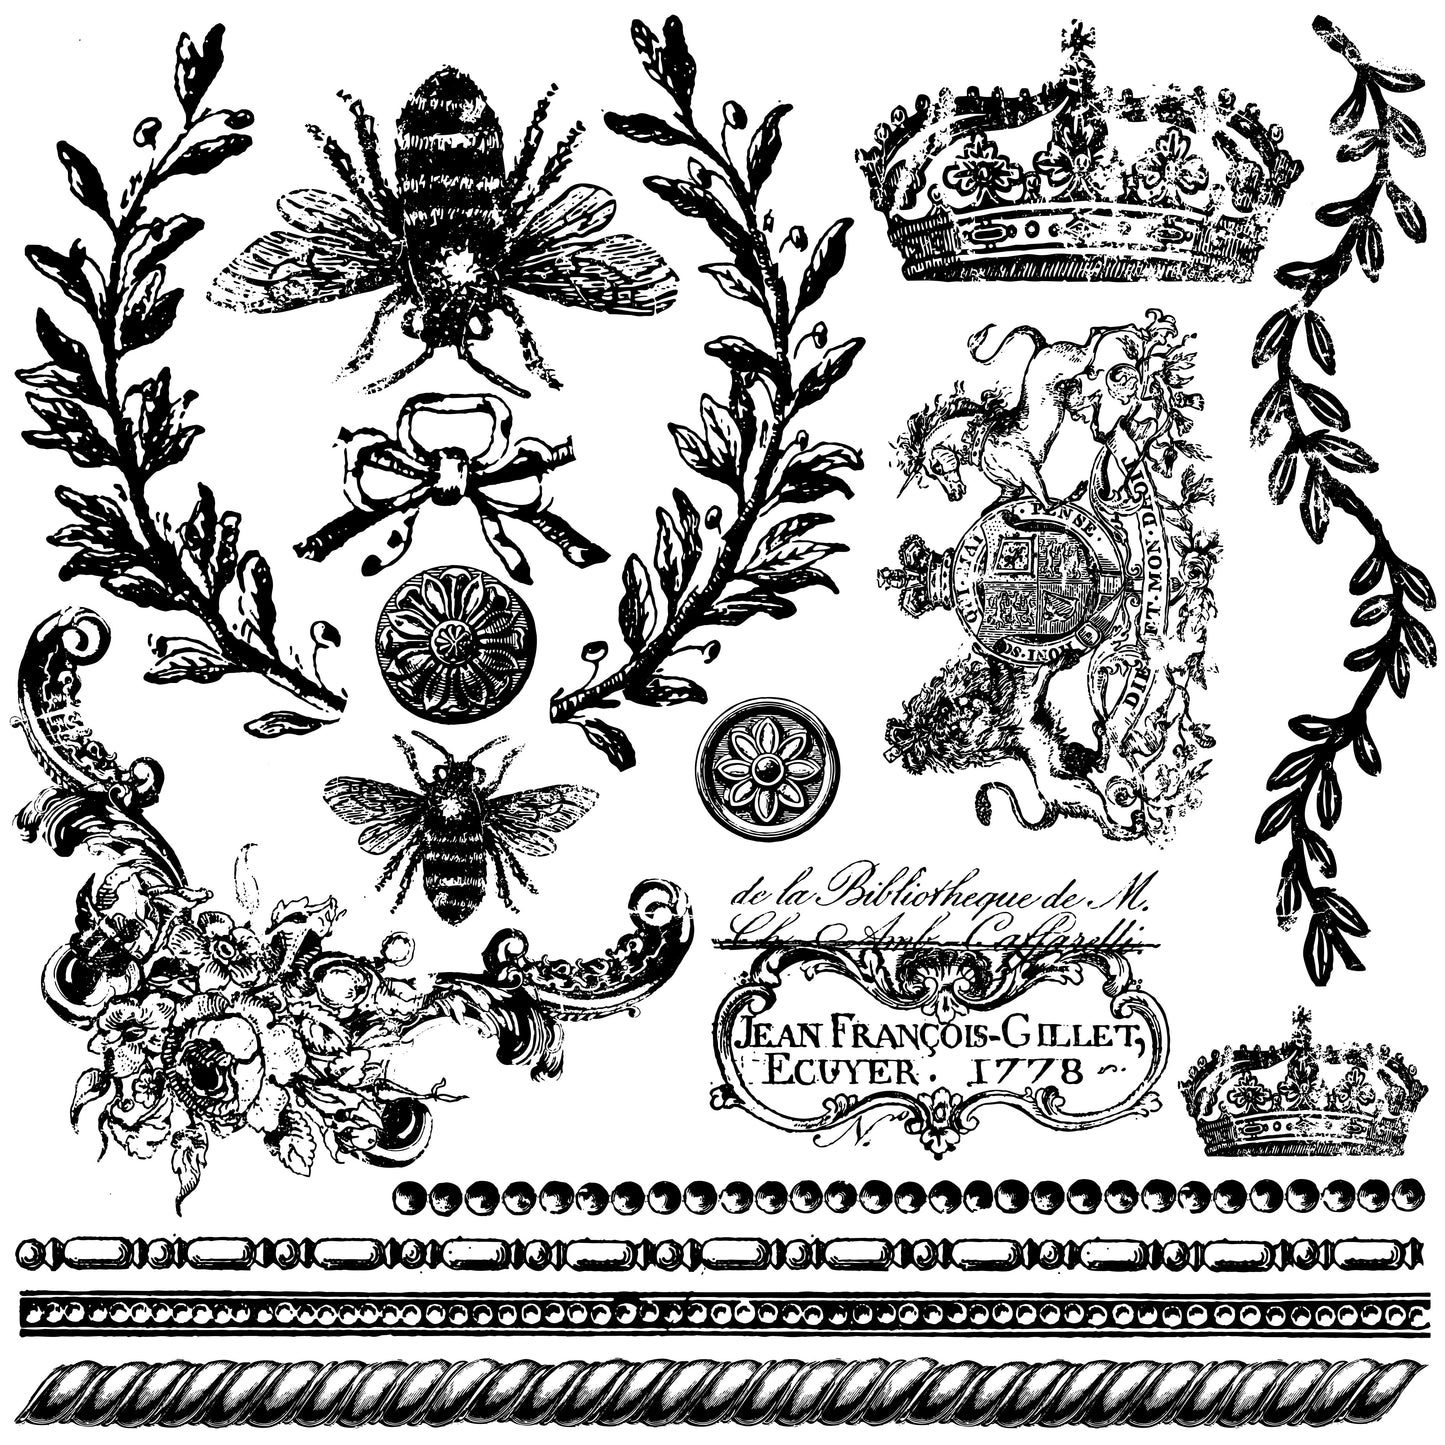 Stamp with multiple bee, crown, laurel and trim elements at Milton's Daughter.